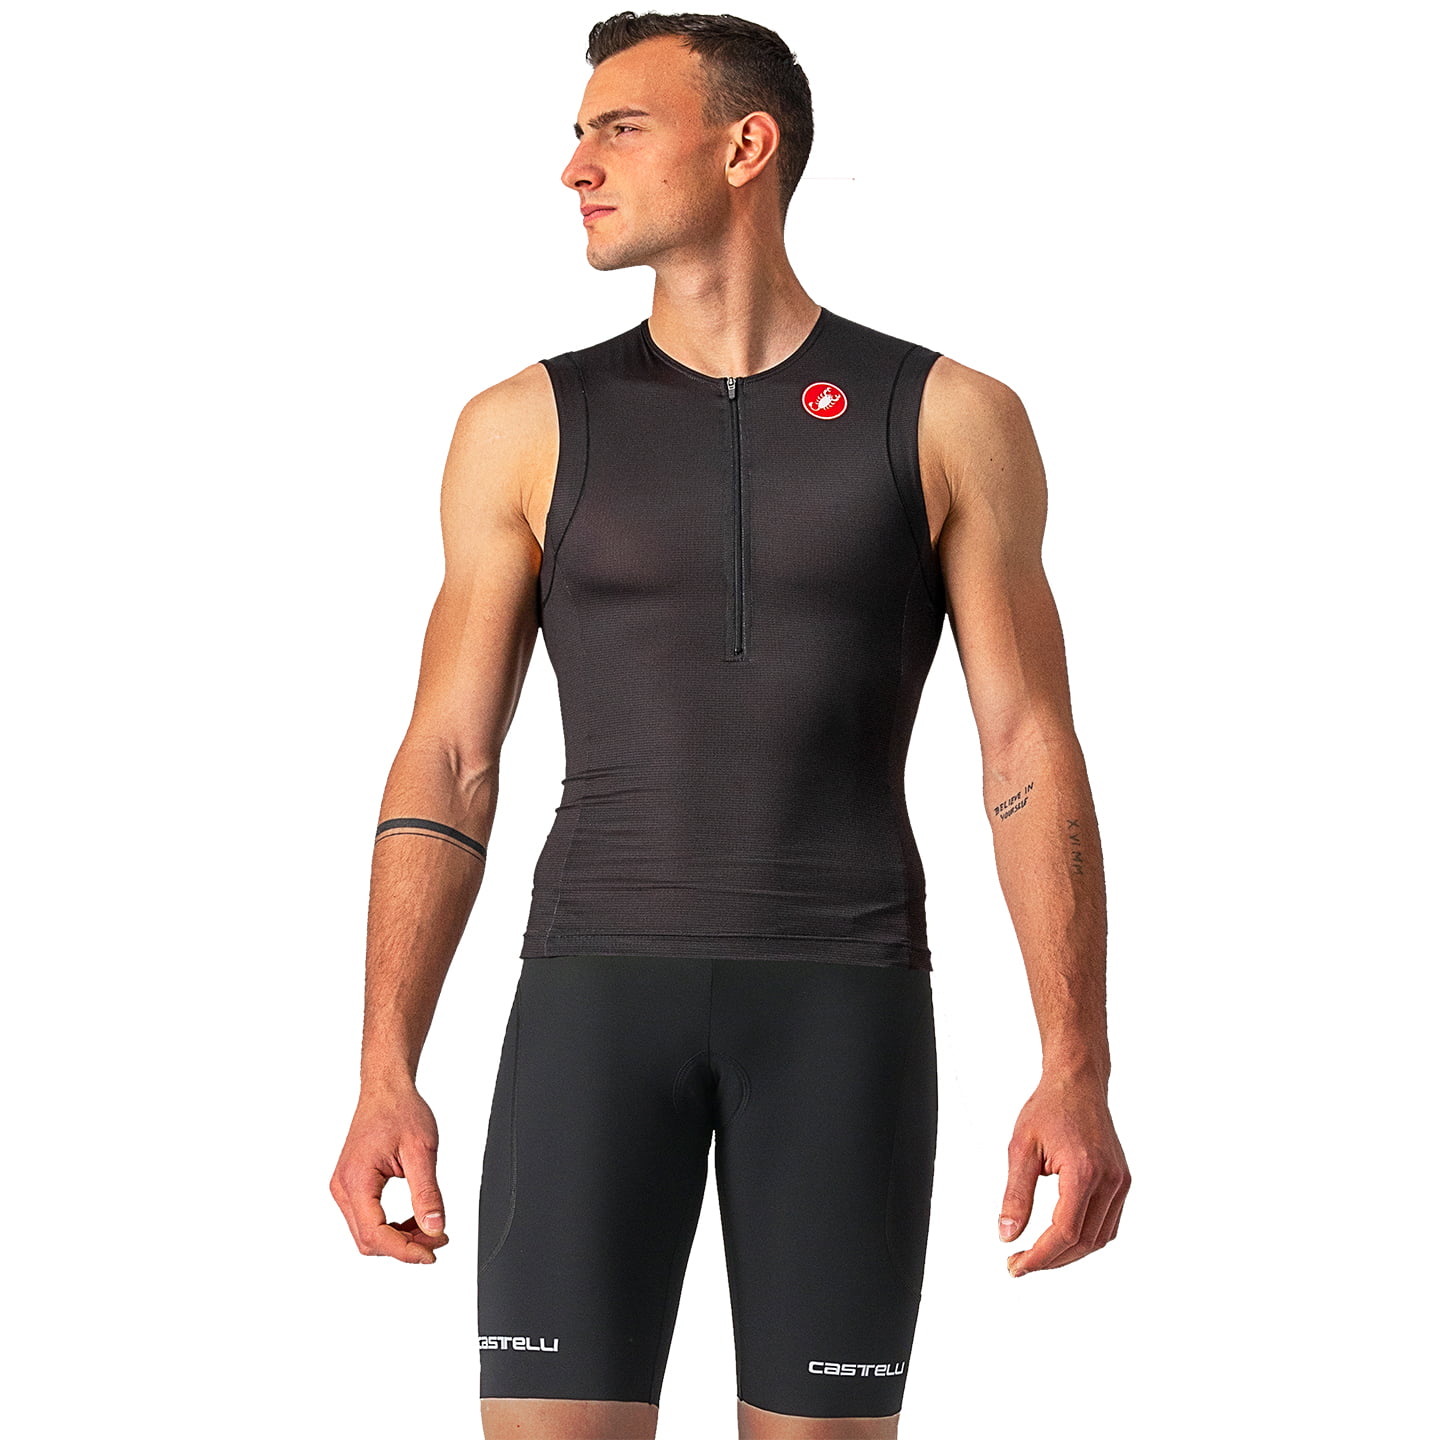 CASTELLI Tri Free 2 Set (cycling jersey + cycling shorts) Set (2 pieces), for men